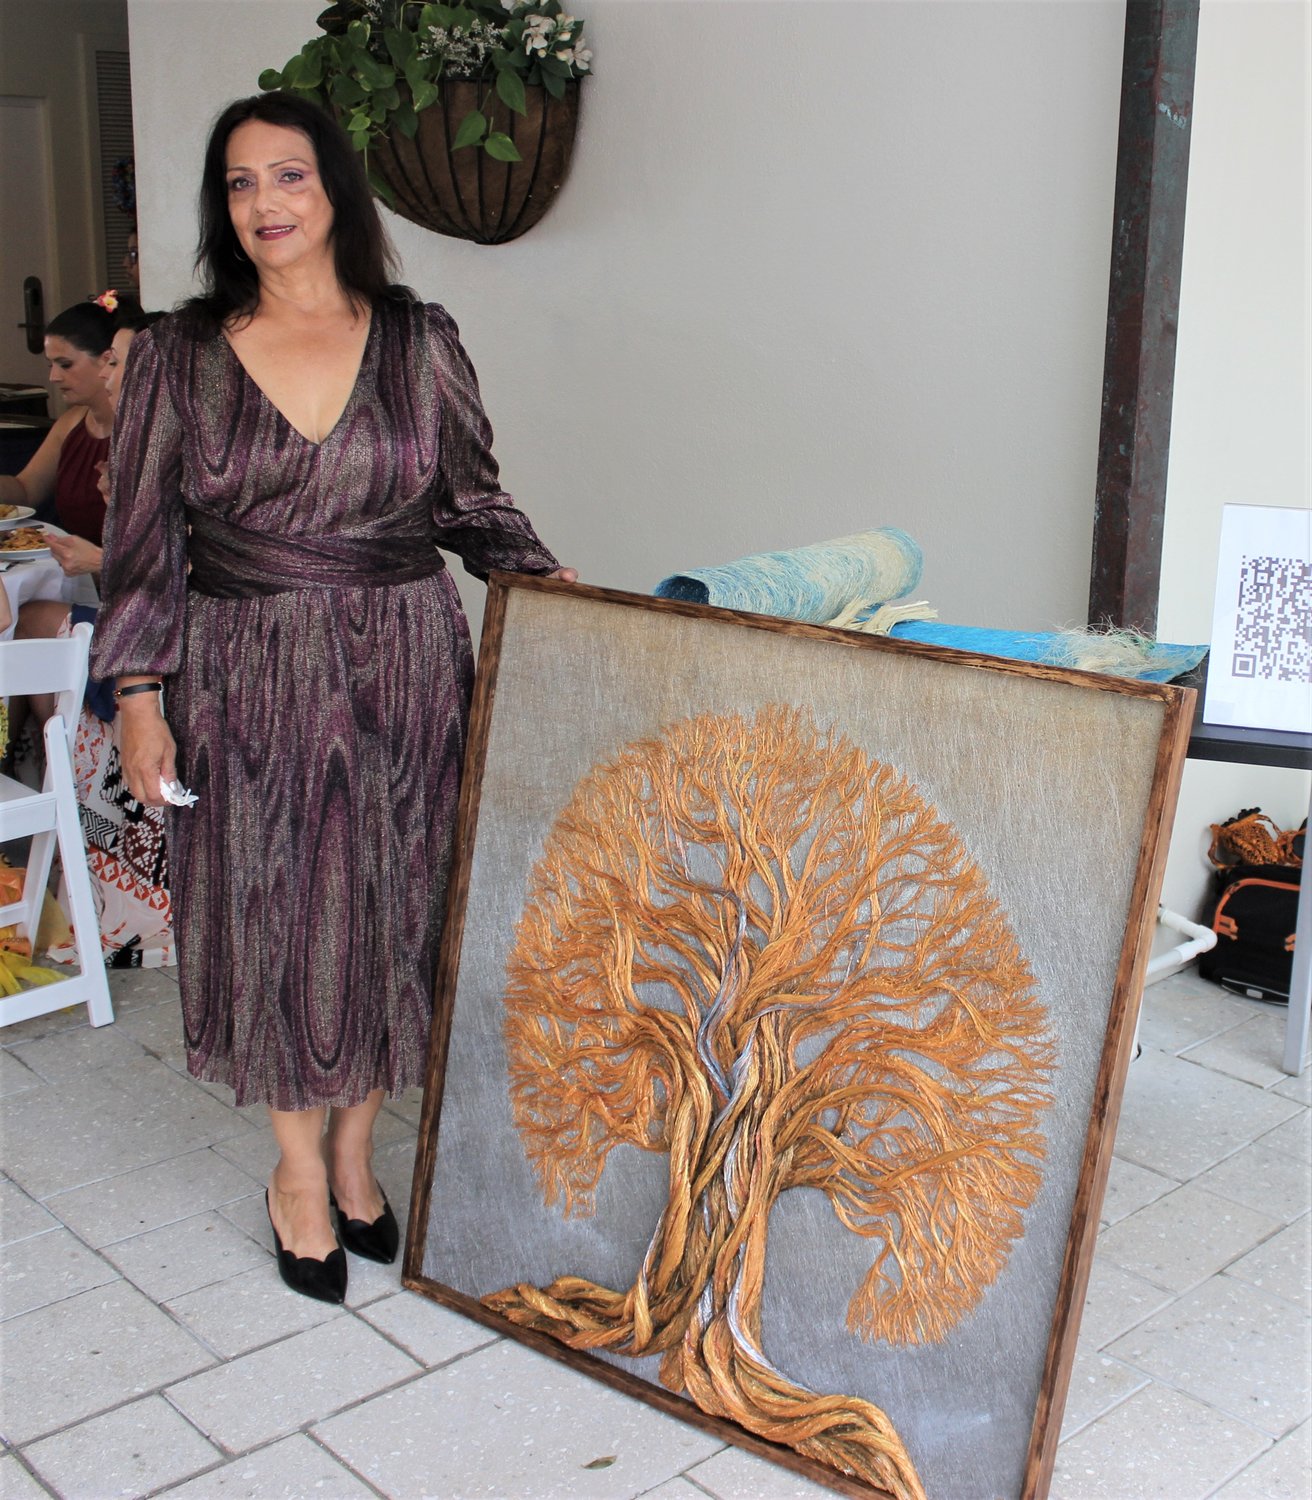 Piedad Camacho shows off one of her fiber works of art at Beaches, A Celebration of the Arts.